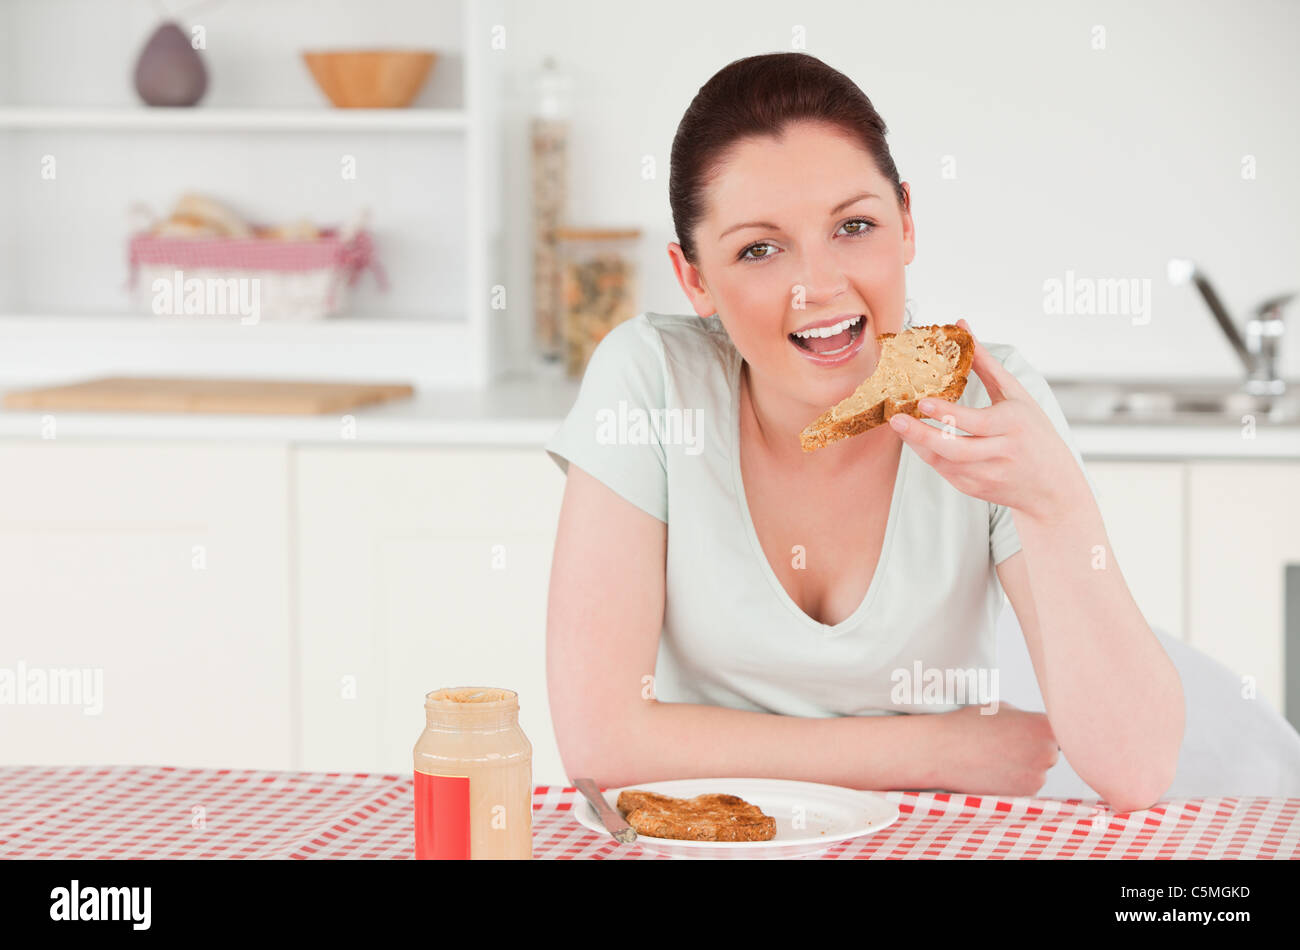 Good looking woman posing while eating a slice of bread Stock Photo